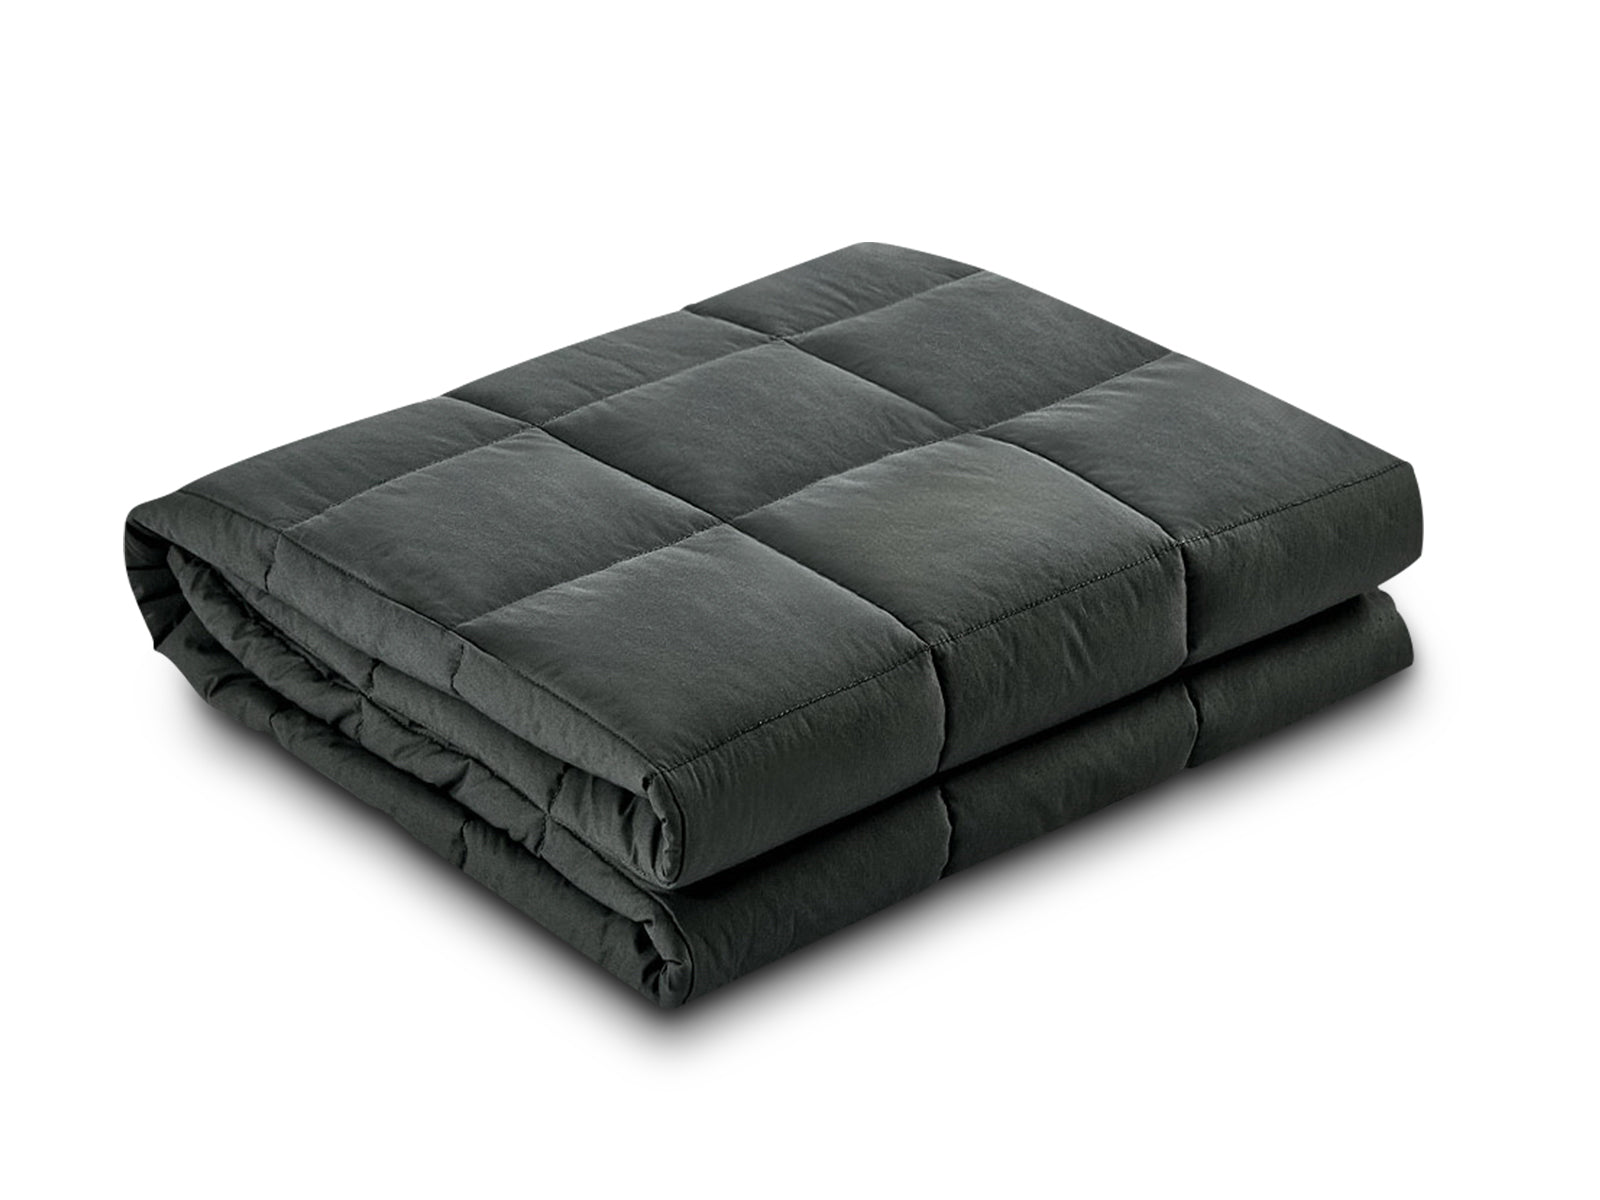 Weighted Blanket 3.2KG